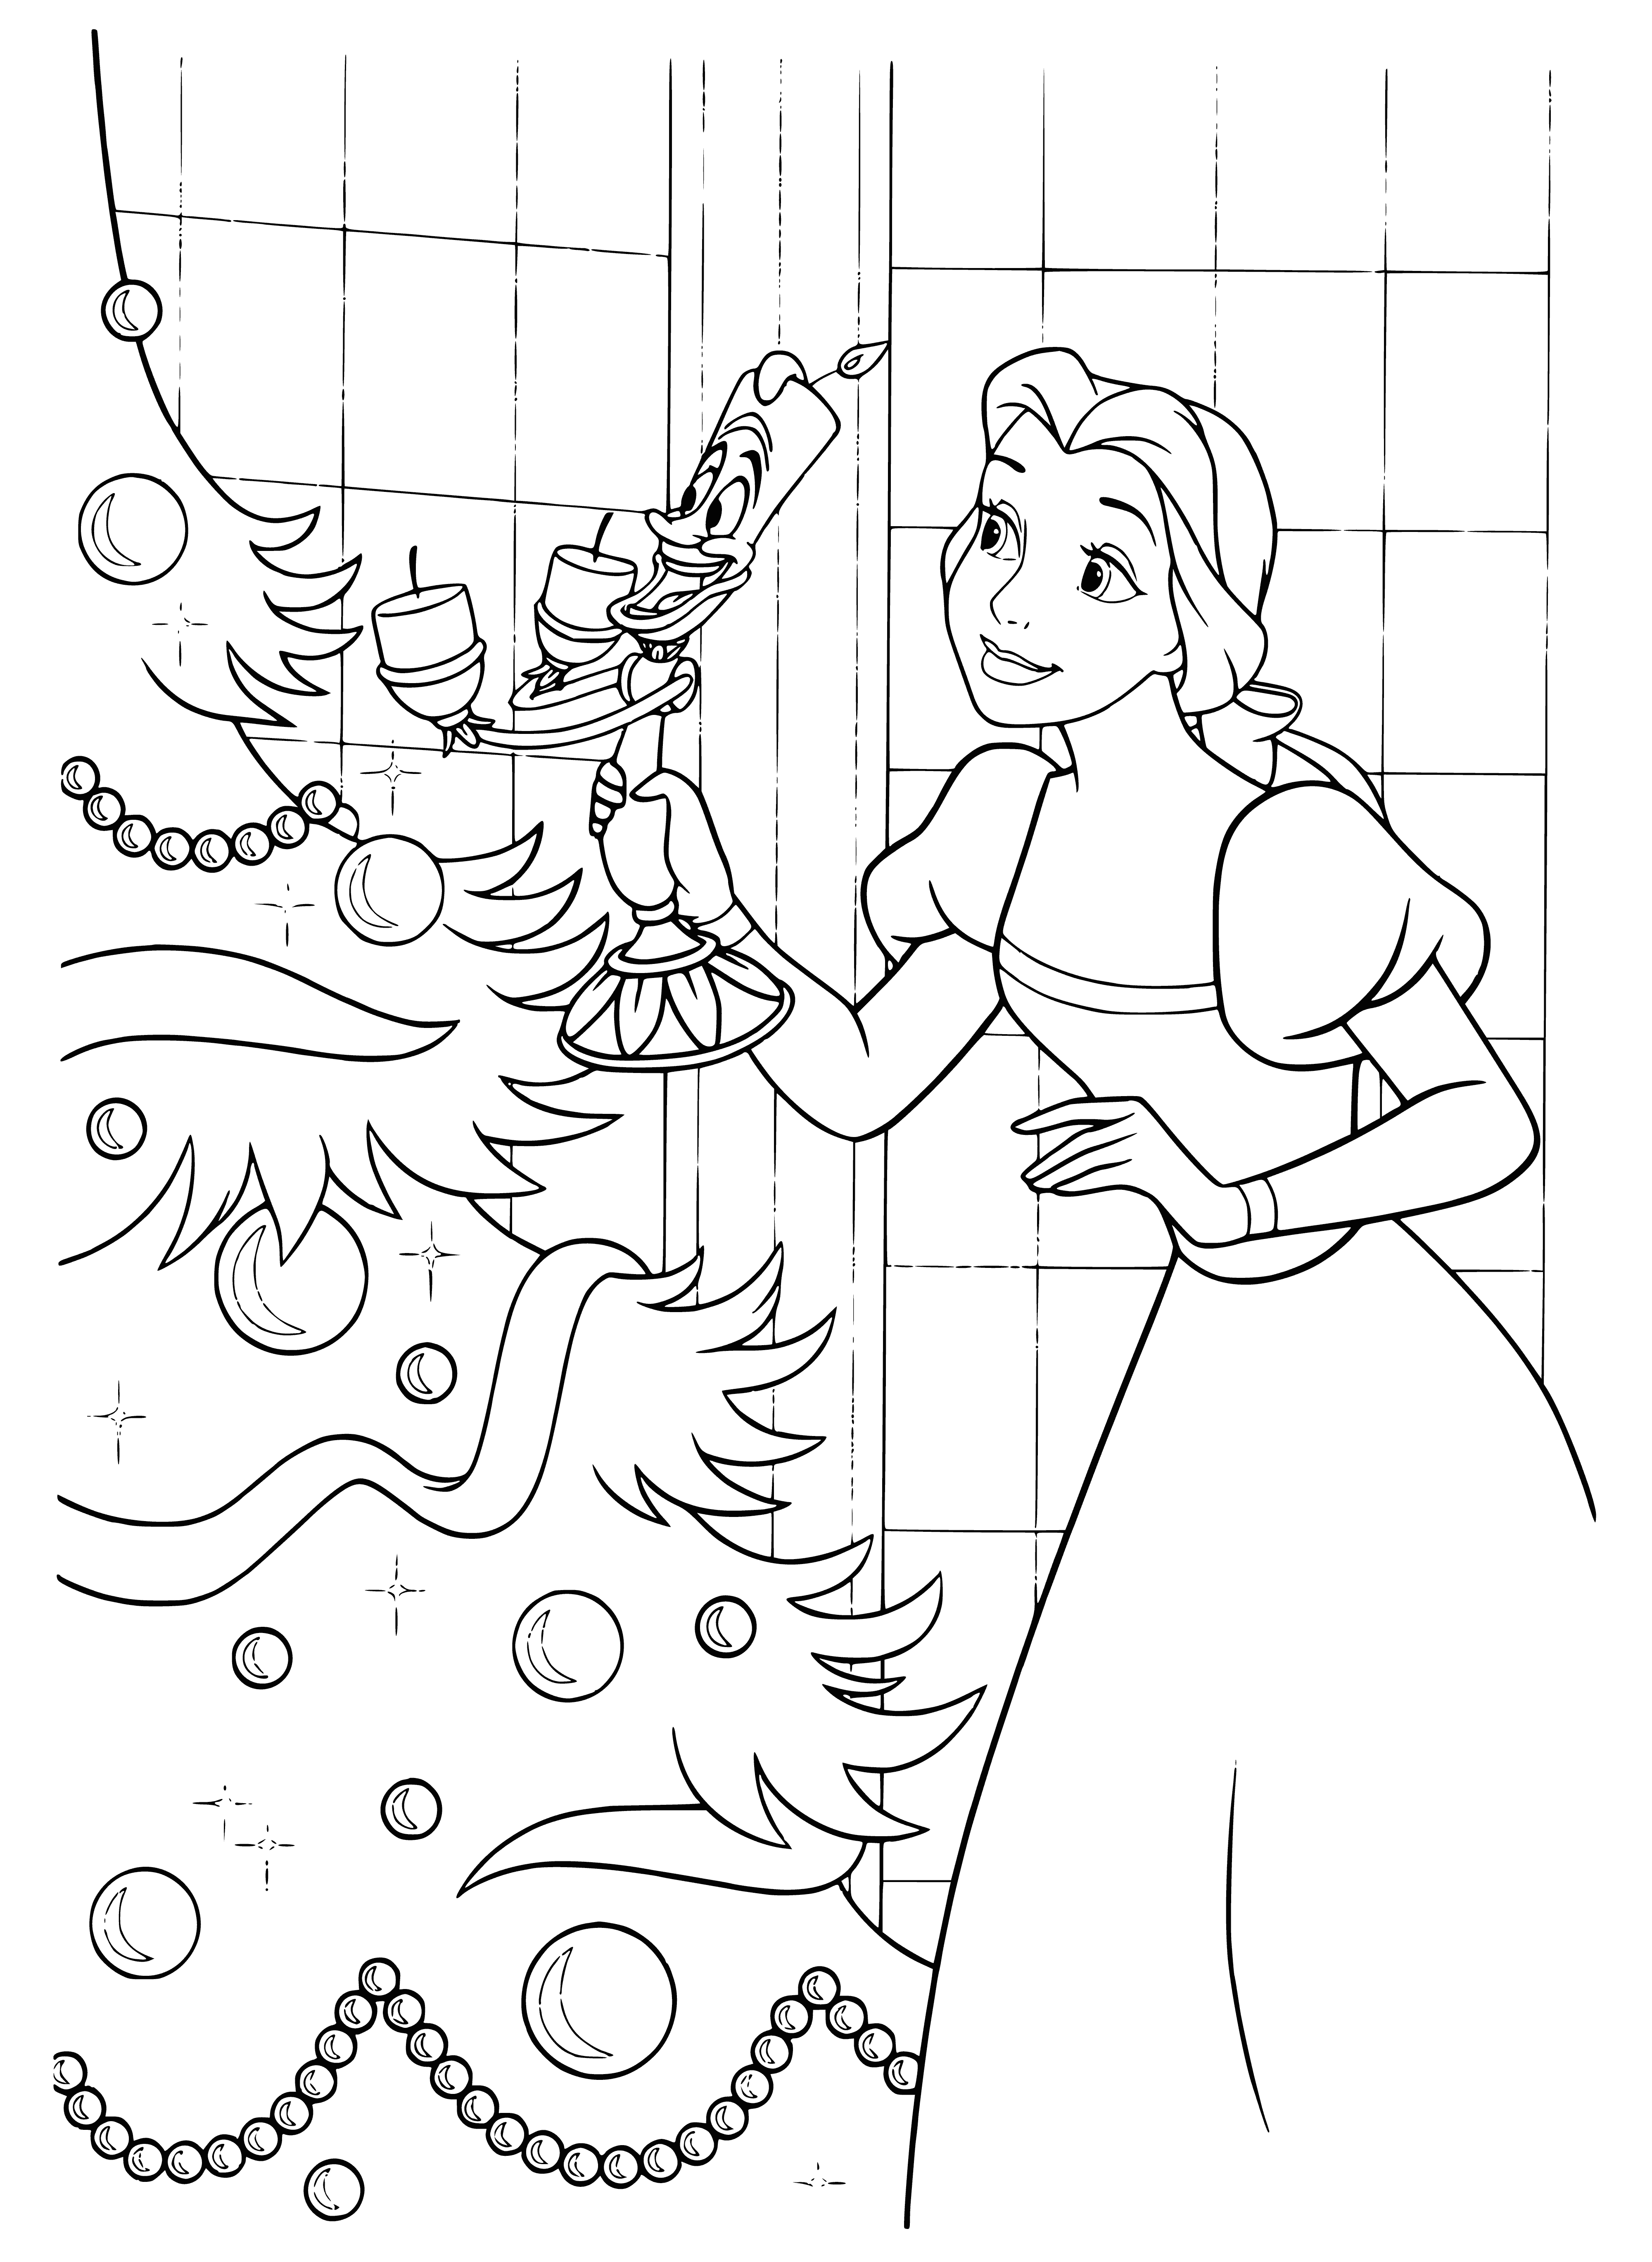 Belle near the Christmas tree coloring page